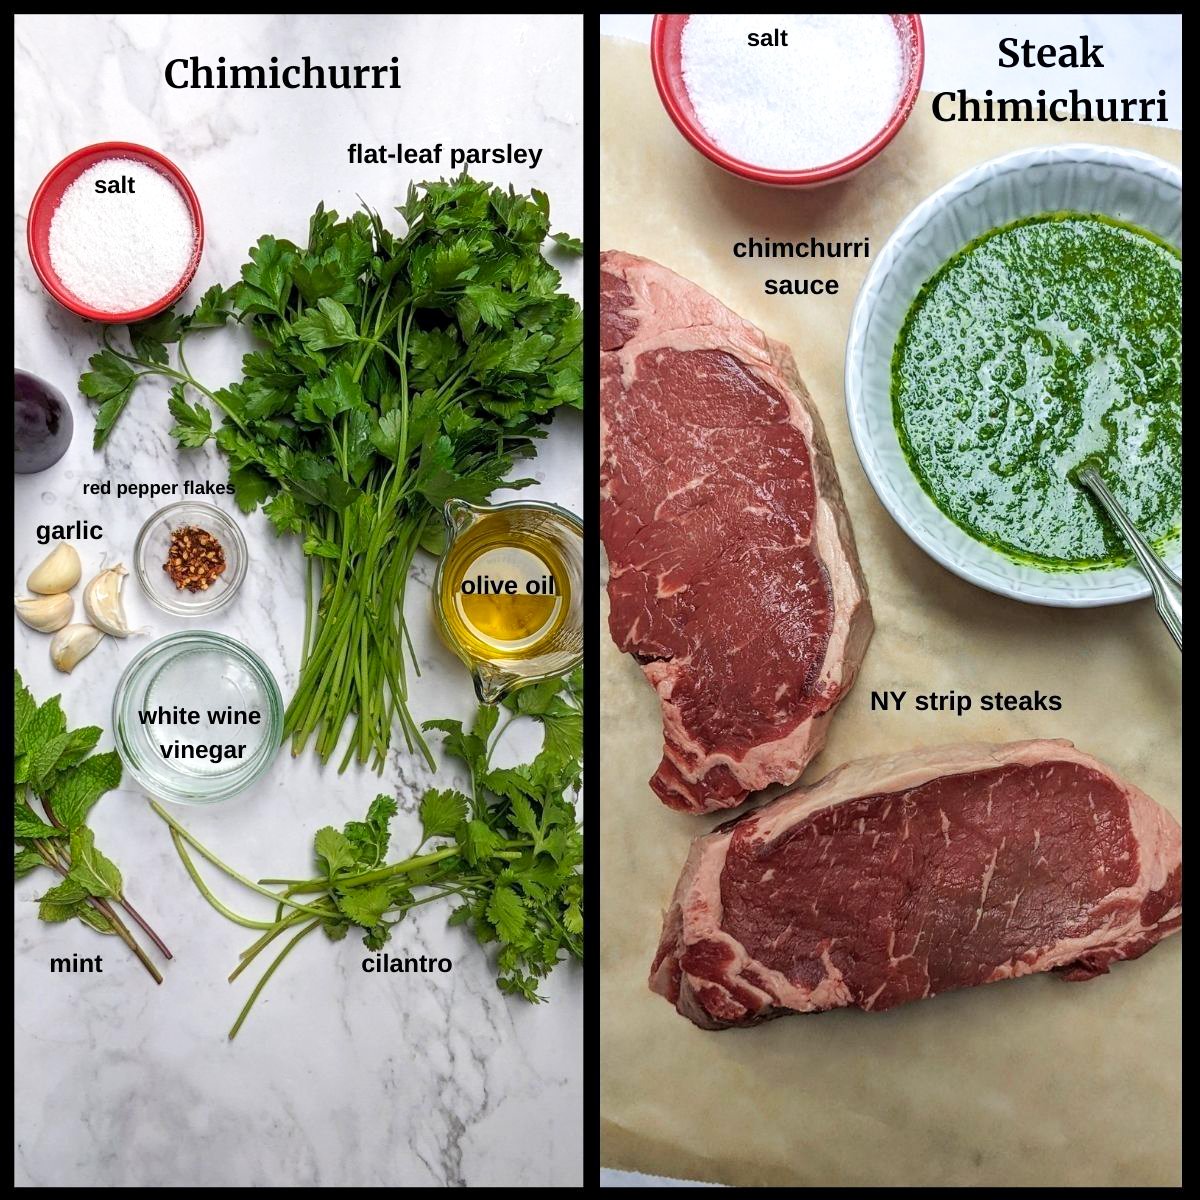 Side by side images if ingredients, sone to make the chimichurri and the other for the steak.